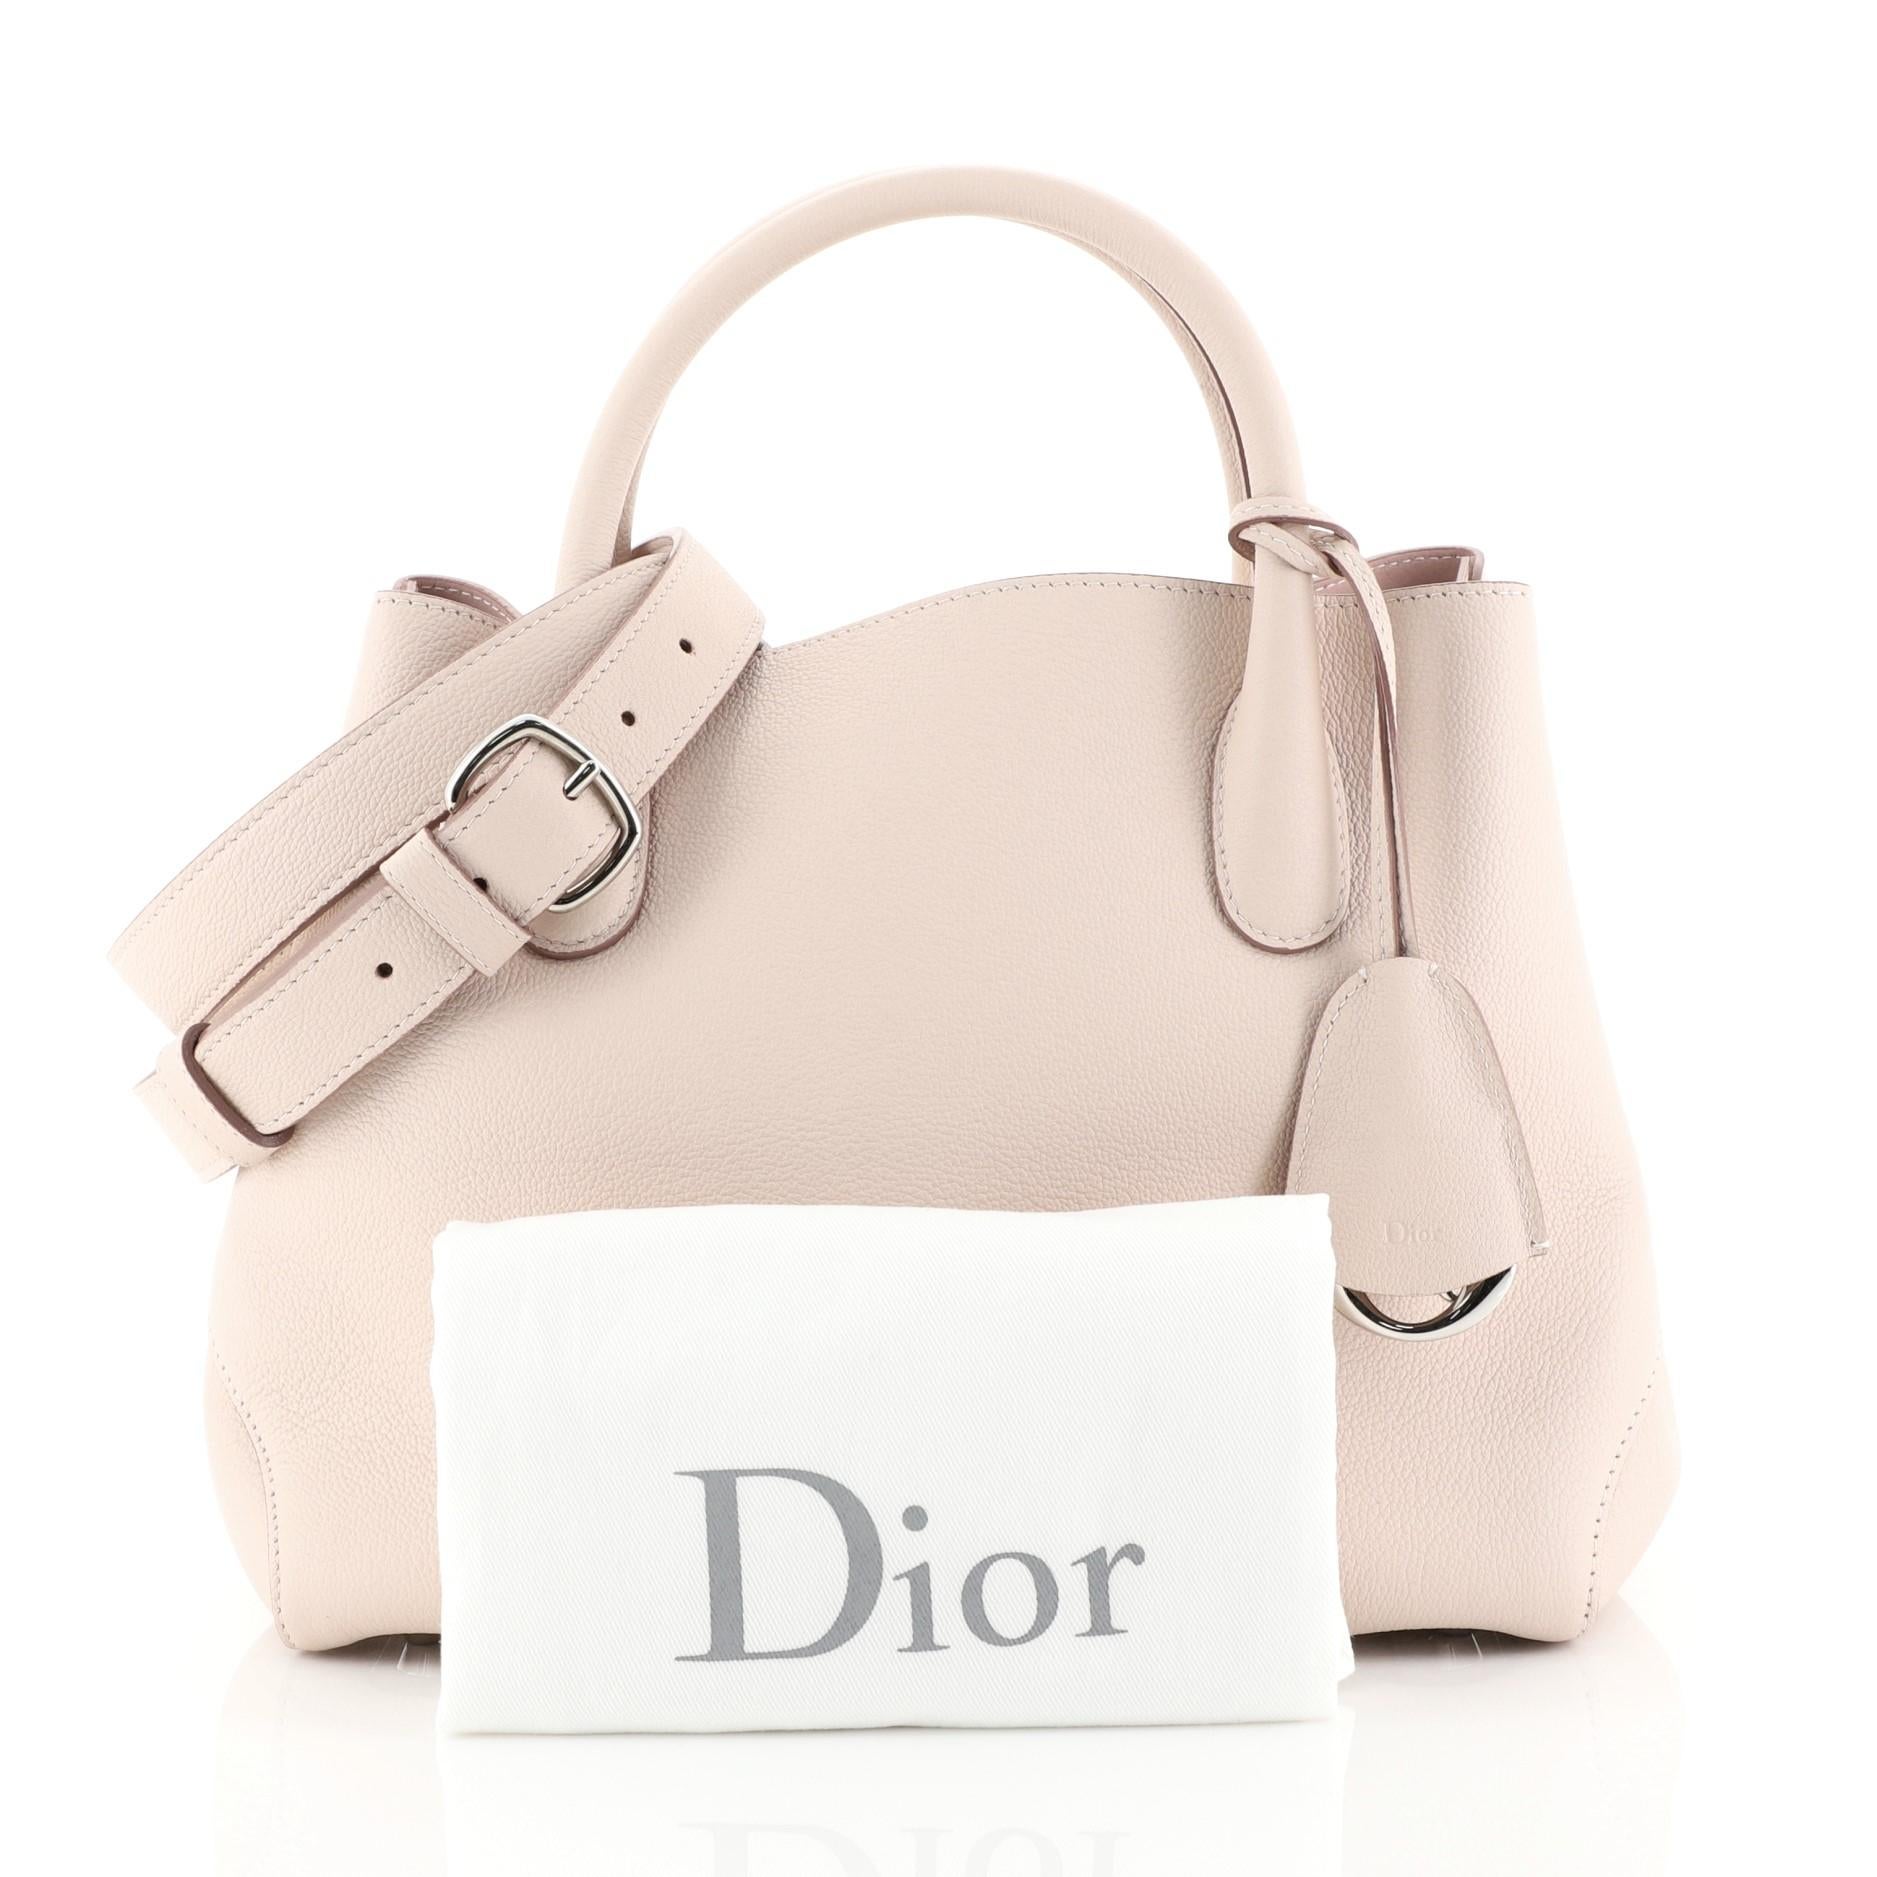 This Christian Dior Open Bar Bag Leather Small, crafted in pink leather, features dual rolled handles, protective base studs, and silver-tone hardware. Its wide top with belted side closure opens to a pink leather interior with snap and slip